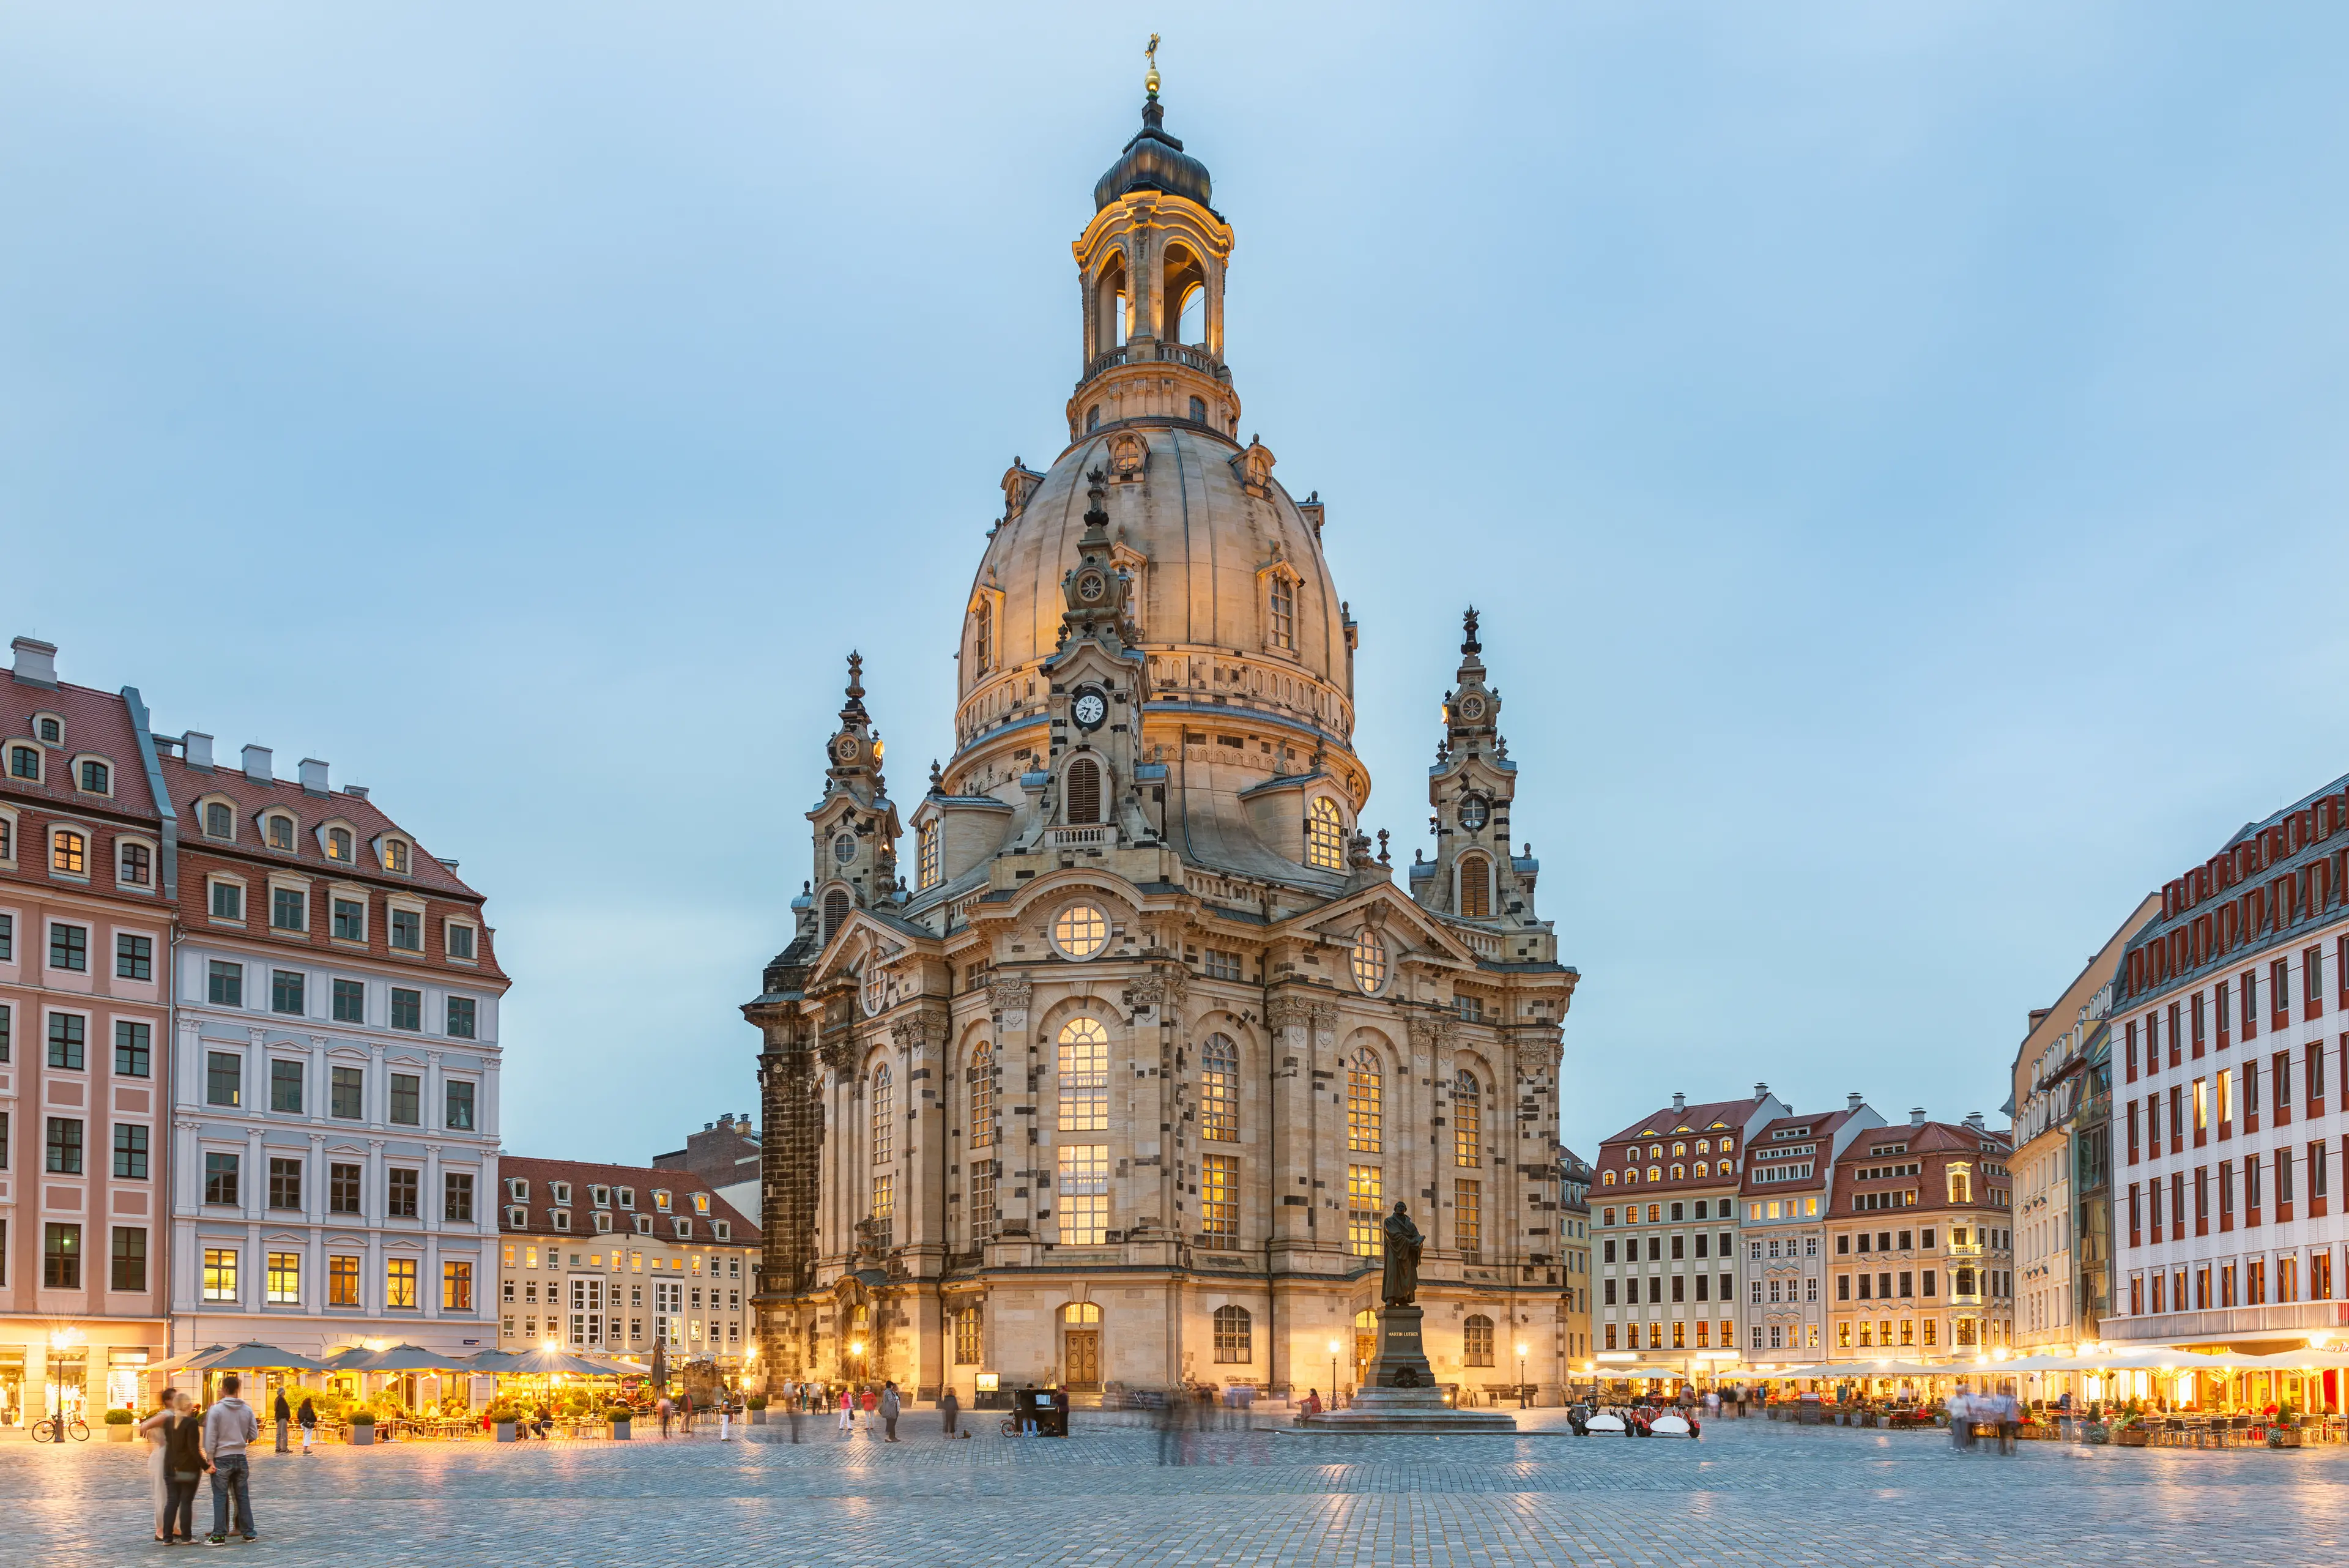 2-Day Outdoor Adventure Itinerary in Dresden for Friends